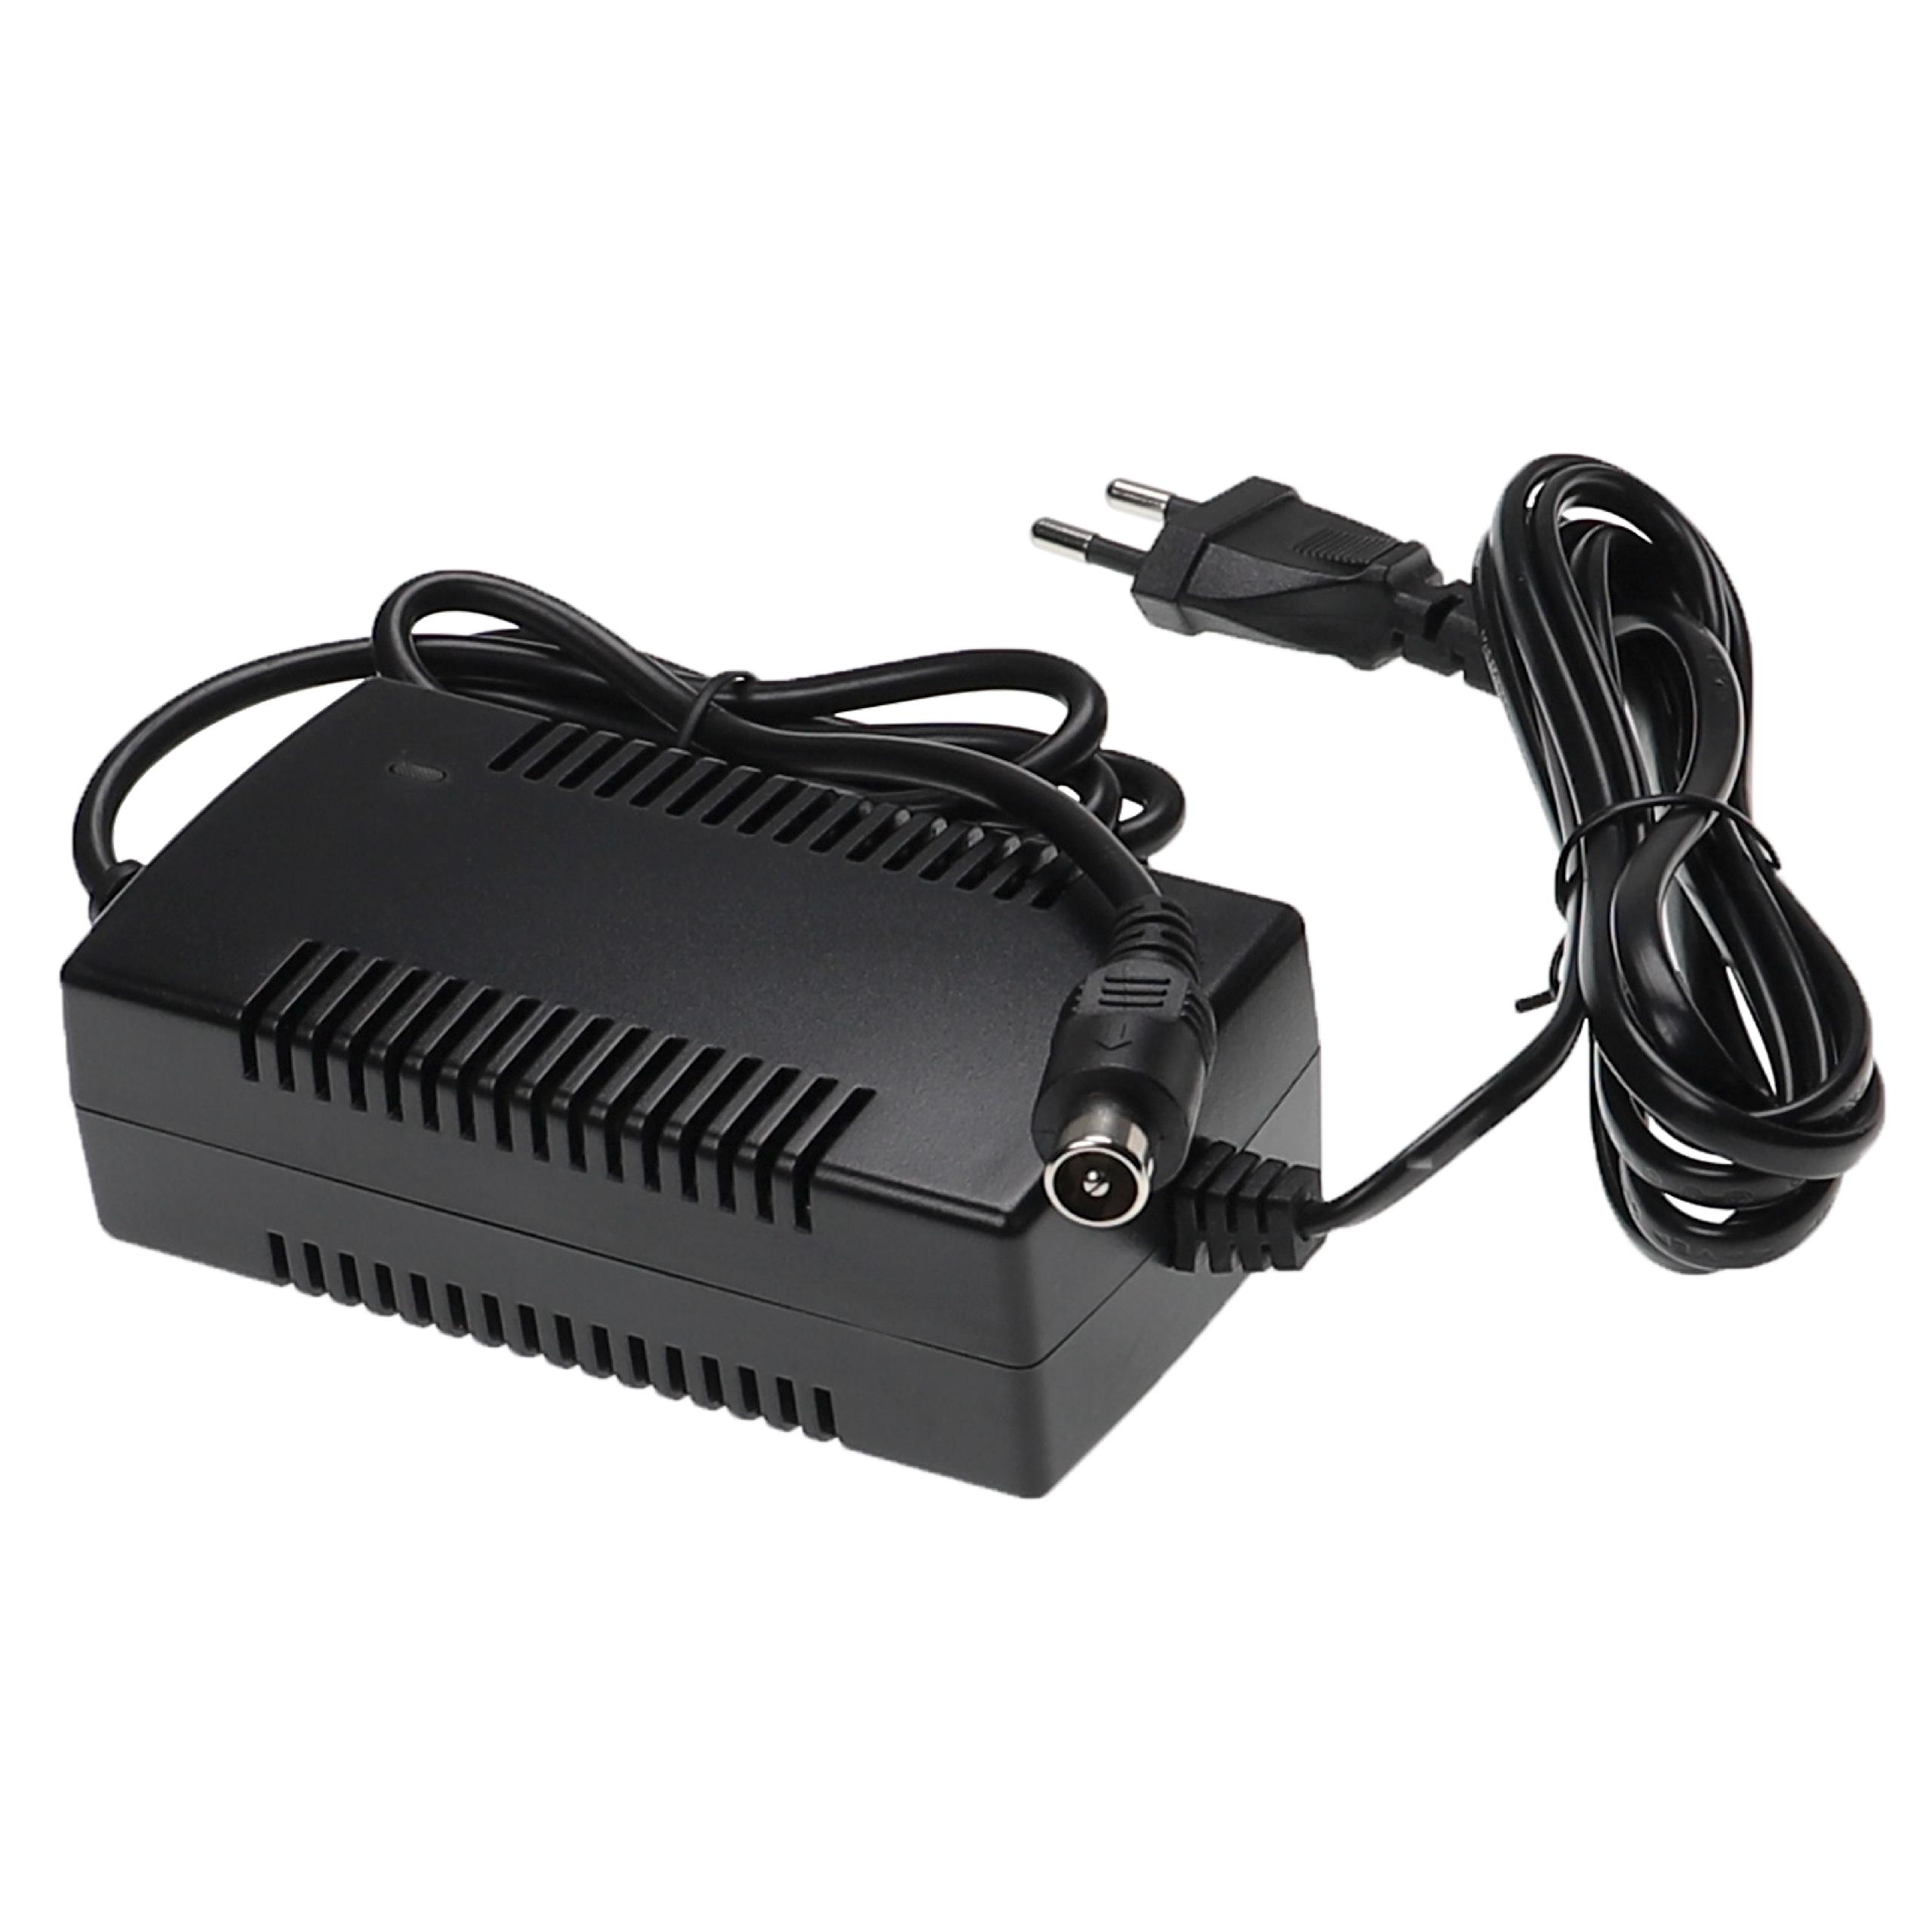 Charger suitable for Li-Ion E-Bike Battery - With 1 Pin Connector, 2.0 A